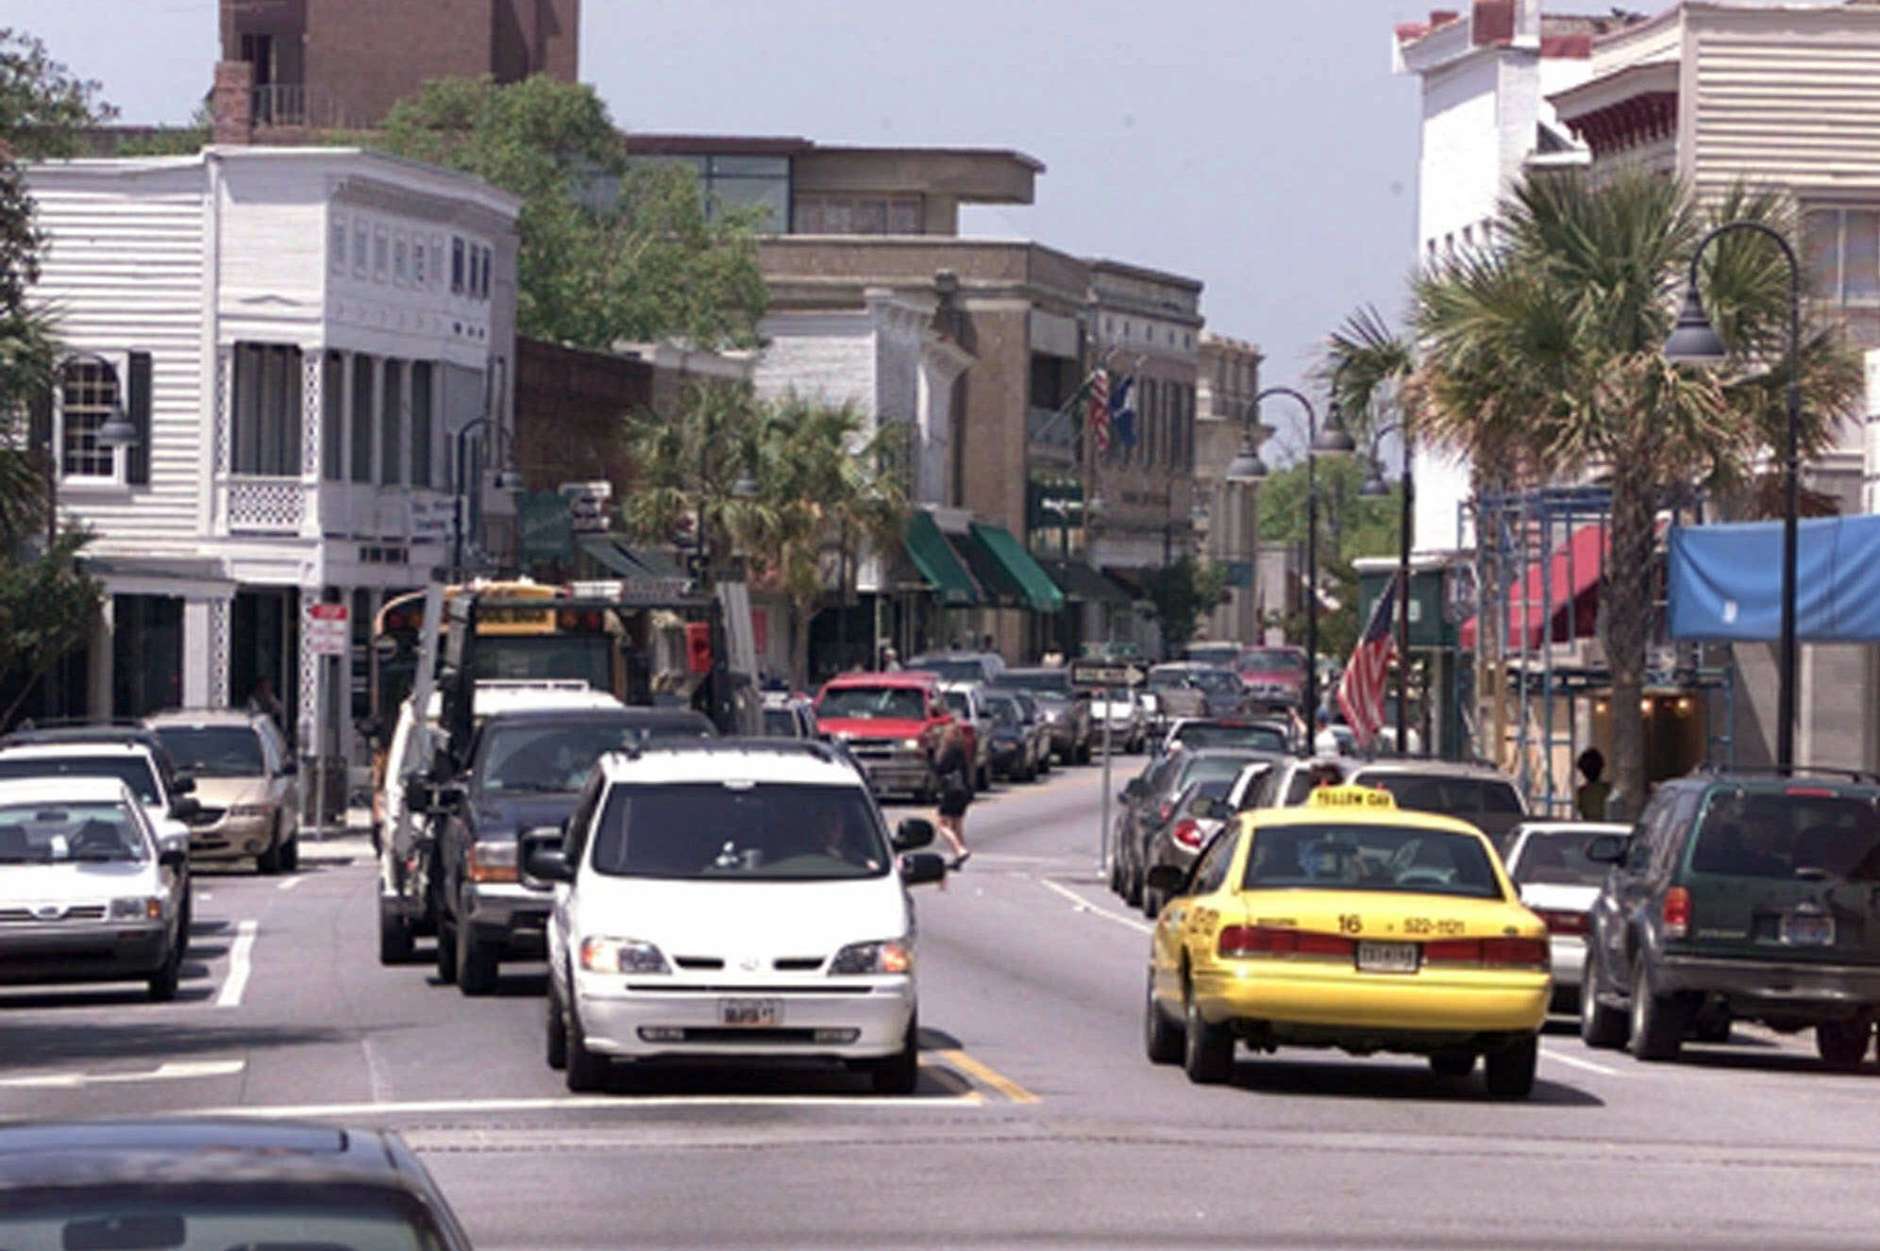 Midday traffic is shown on Bay Street in downtown Beaufort, S.C., April 19, 2001. Beaufort, one of the oldest communities in South Carolina, grew almost 35 percent in the past decade. (AP Photo/Lou Krasky)